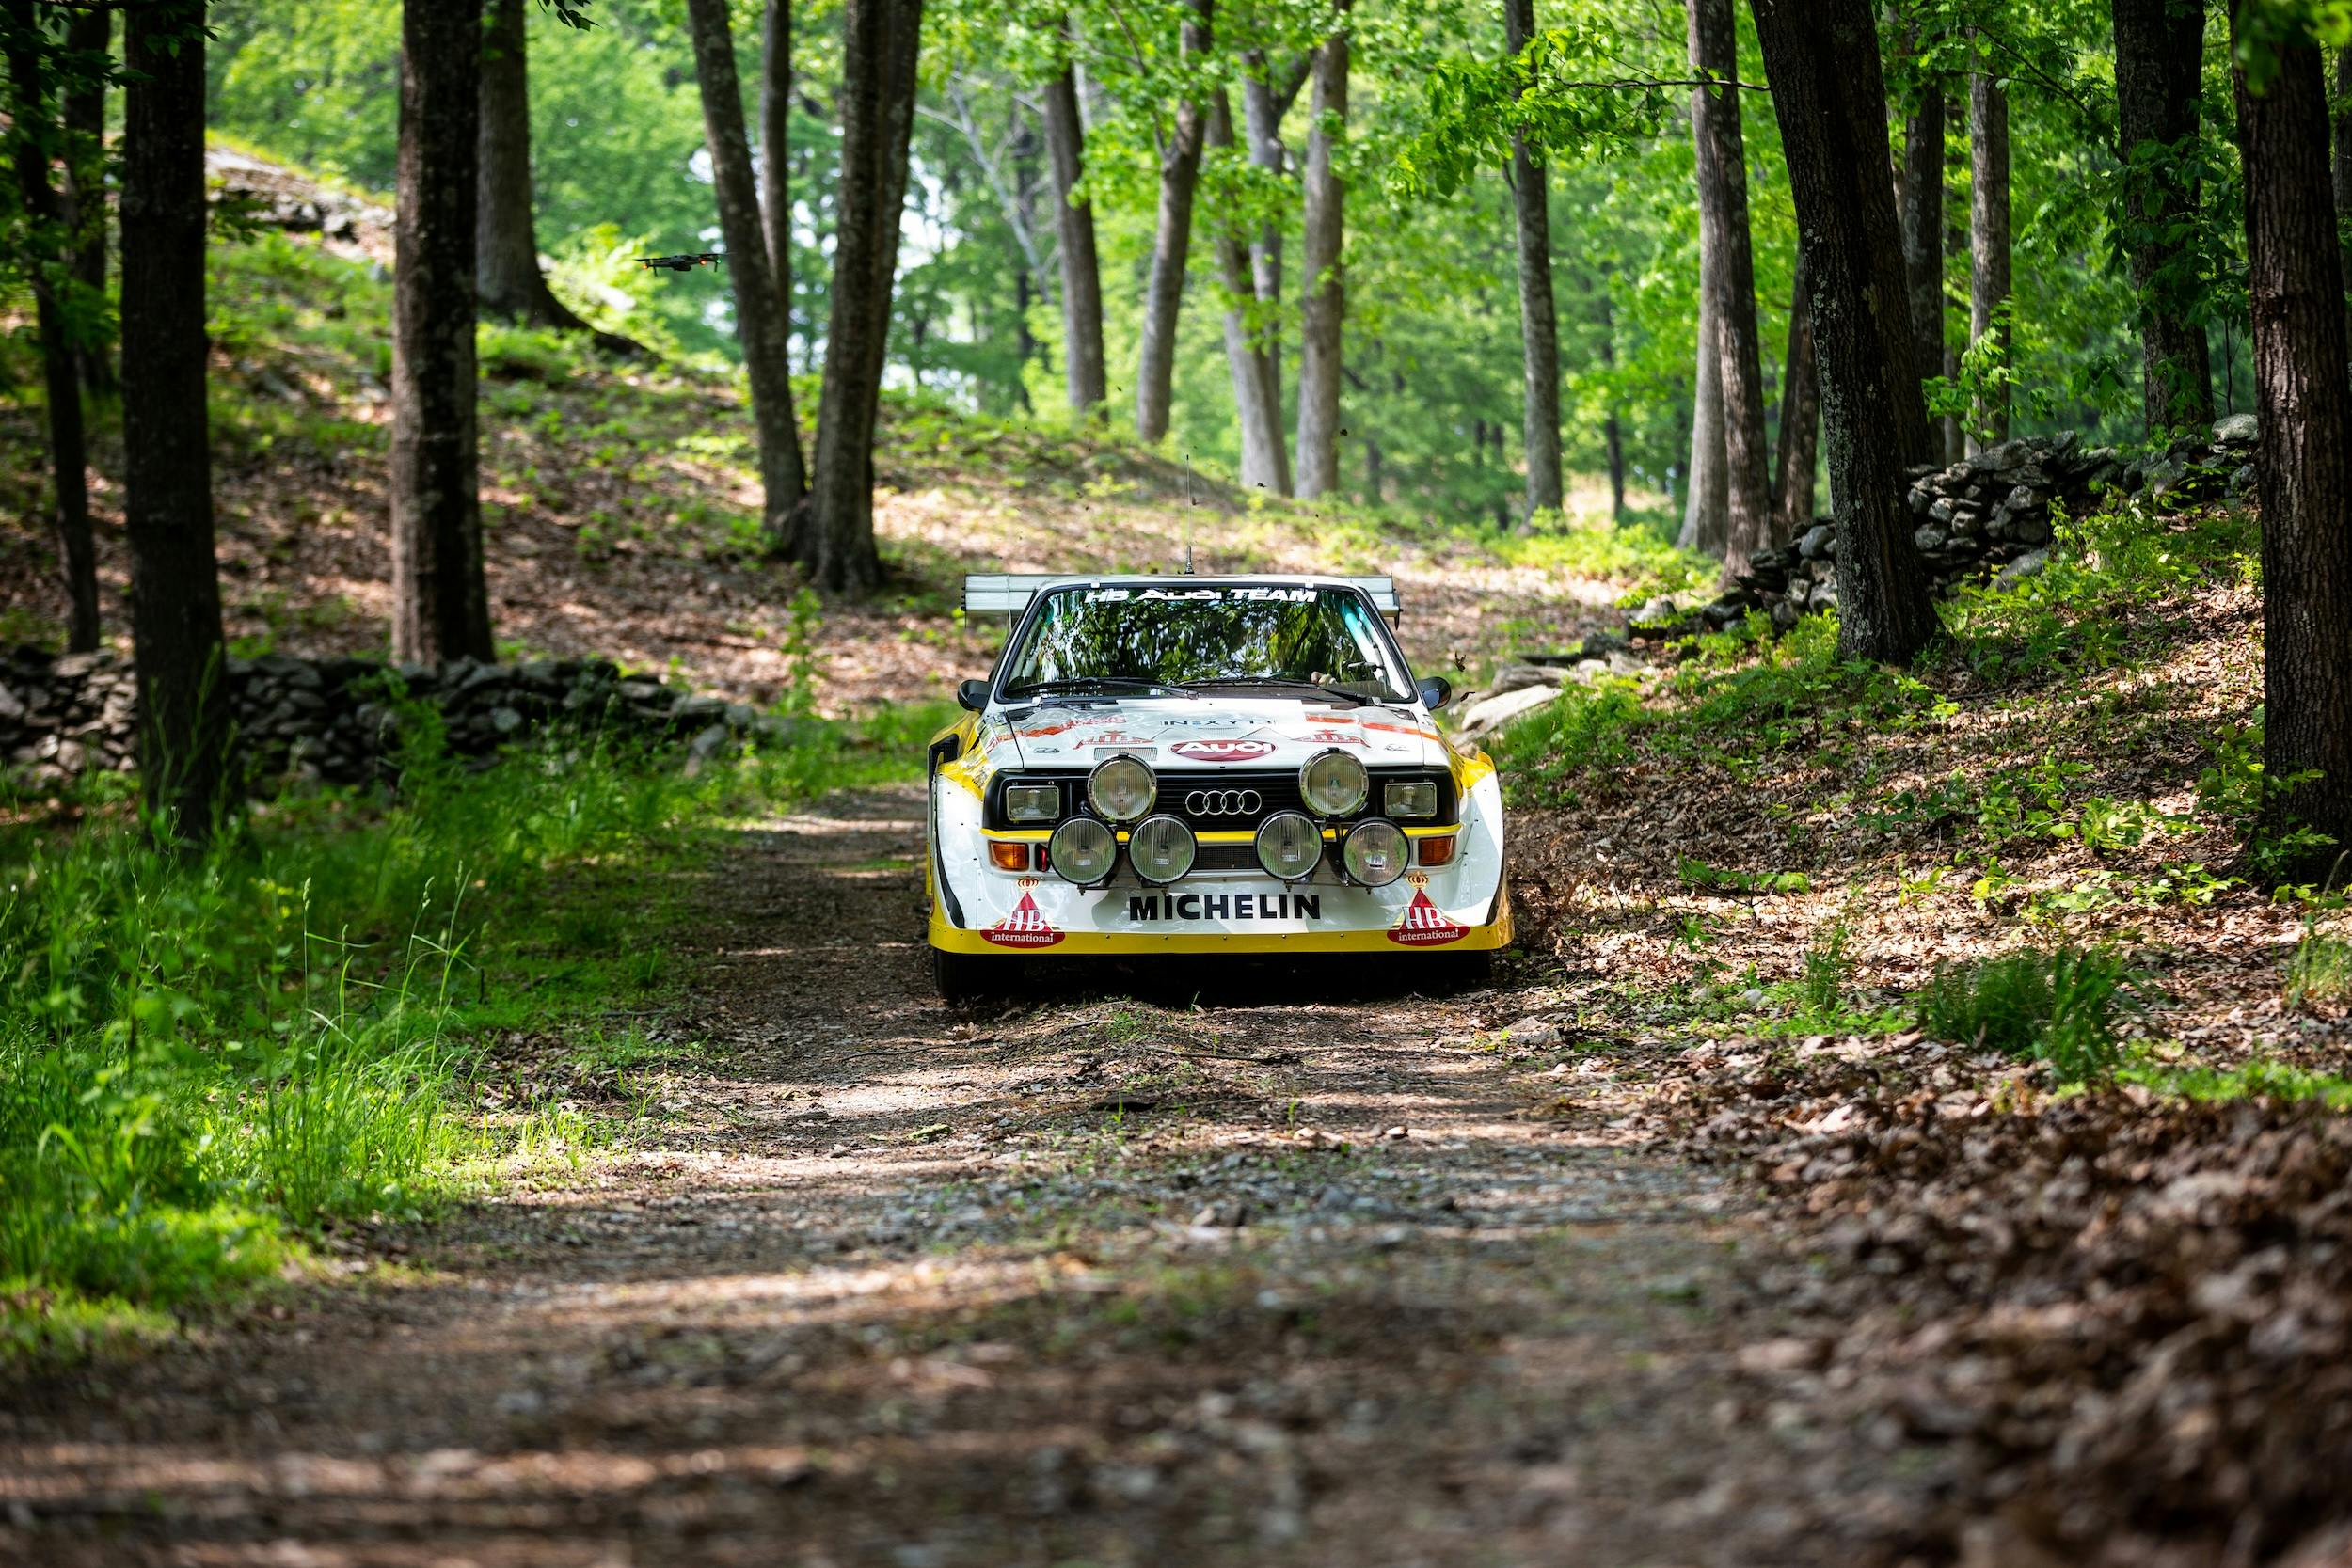 1985 Audi Sport Quattro S1 E2 woods front Group B rally